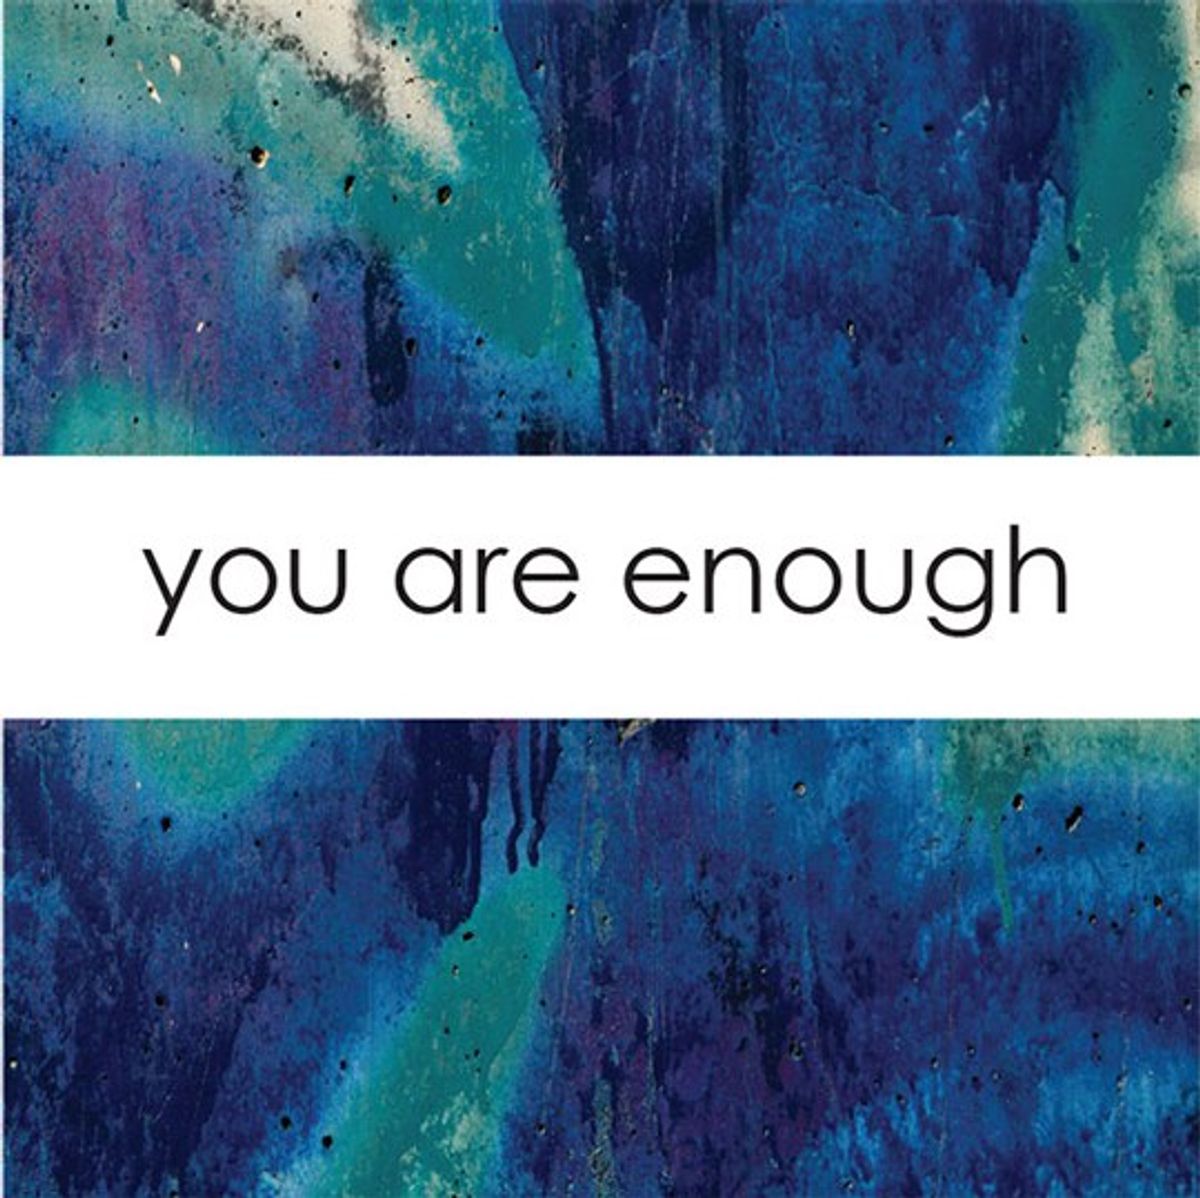 Commentary On Being 'Enough' For People